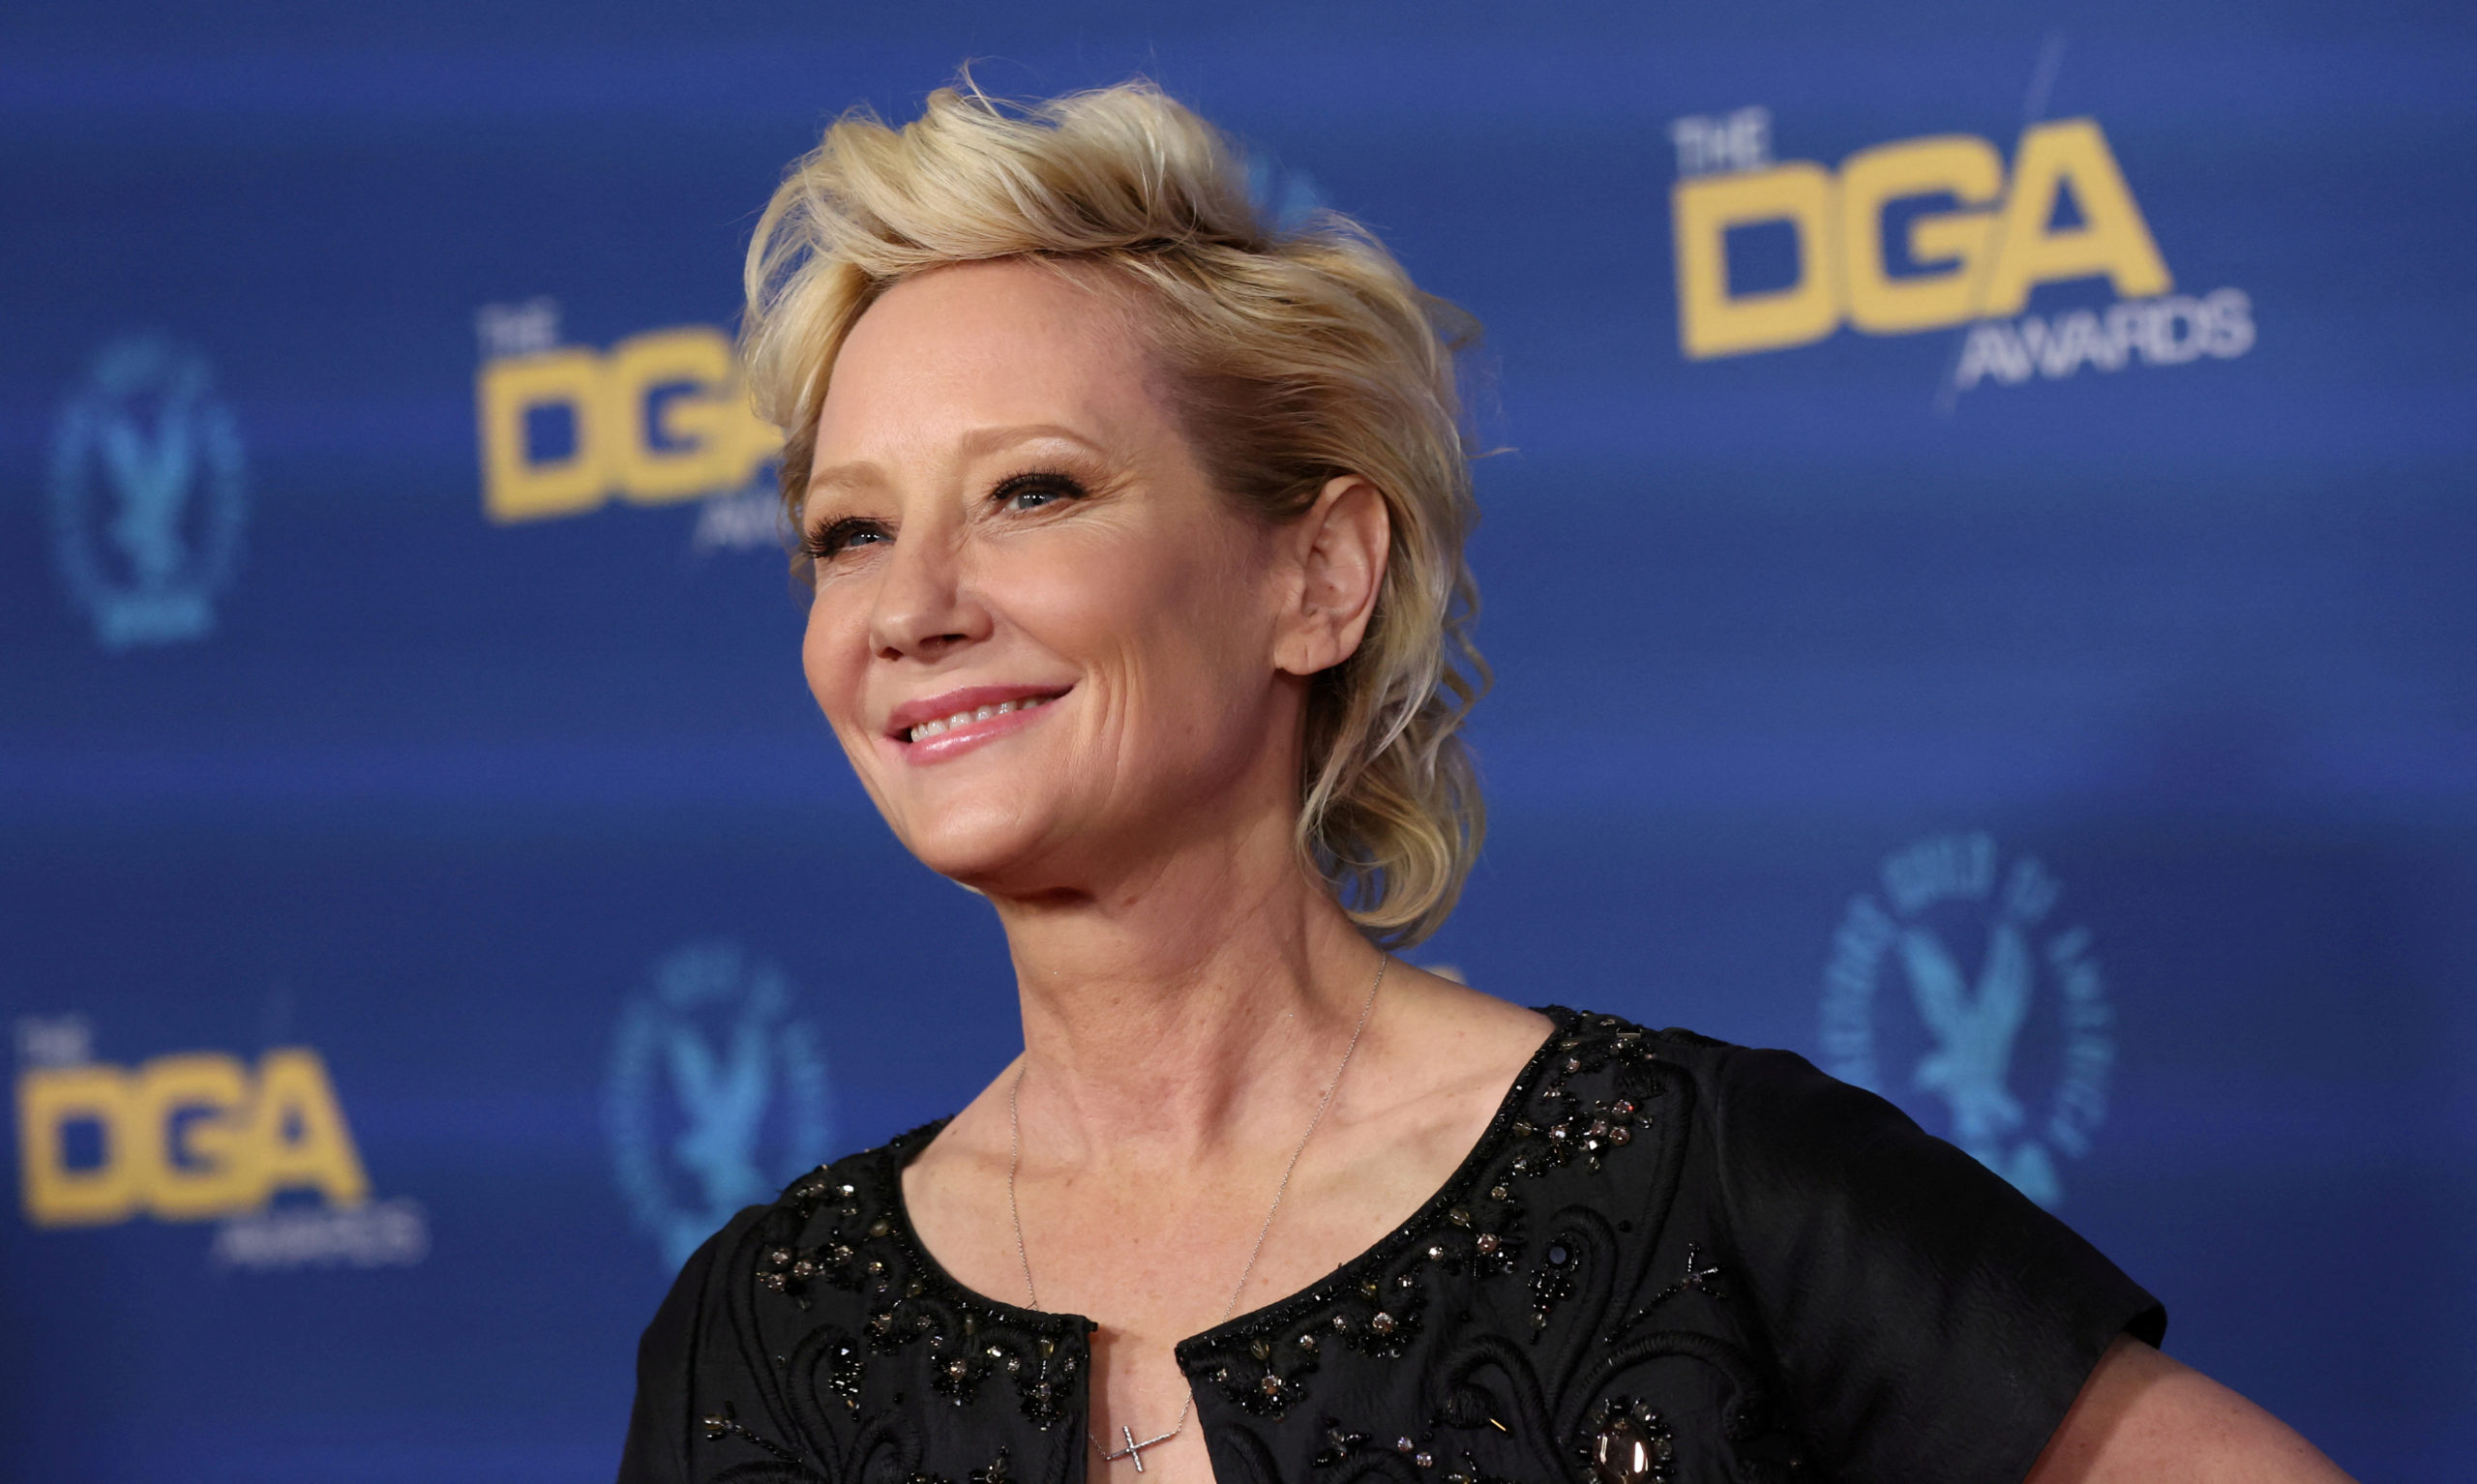 Actor Anne Heche attends the 74th Annual Directors Guild of America (DGA) Awards in Beverly Hills, California, U.S., March 12, 2022. REUTERS/Mario Anzuoni/File Photo